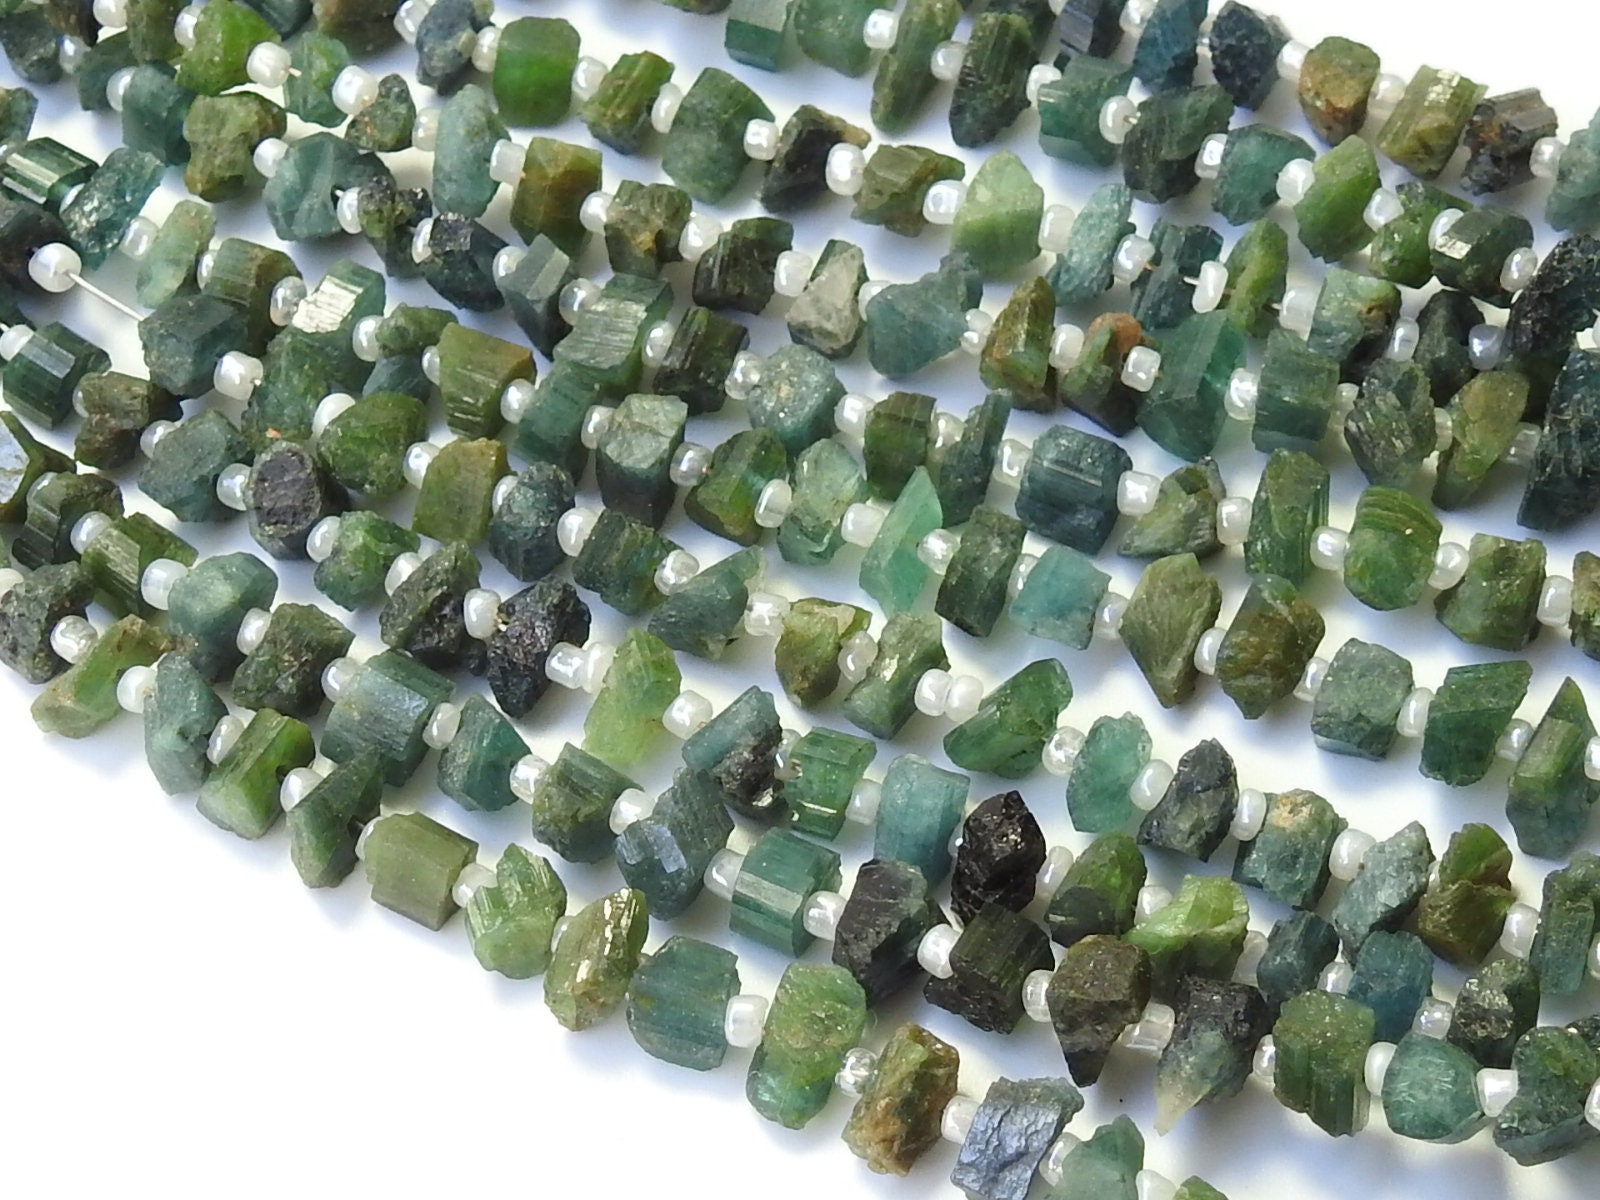 Green Tourmaline Natural Crystal Rough Beads,Chips,Uncut,Nuggets,Anklets,14Inchs Strand 6X3To4X3MM Approx,Wholesaler,Supplies,RB2 | Save 33% - Rajasthan Living 12